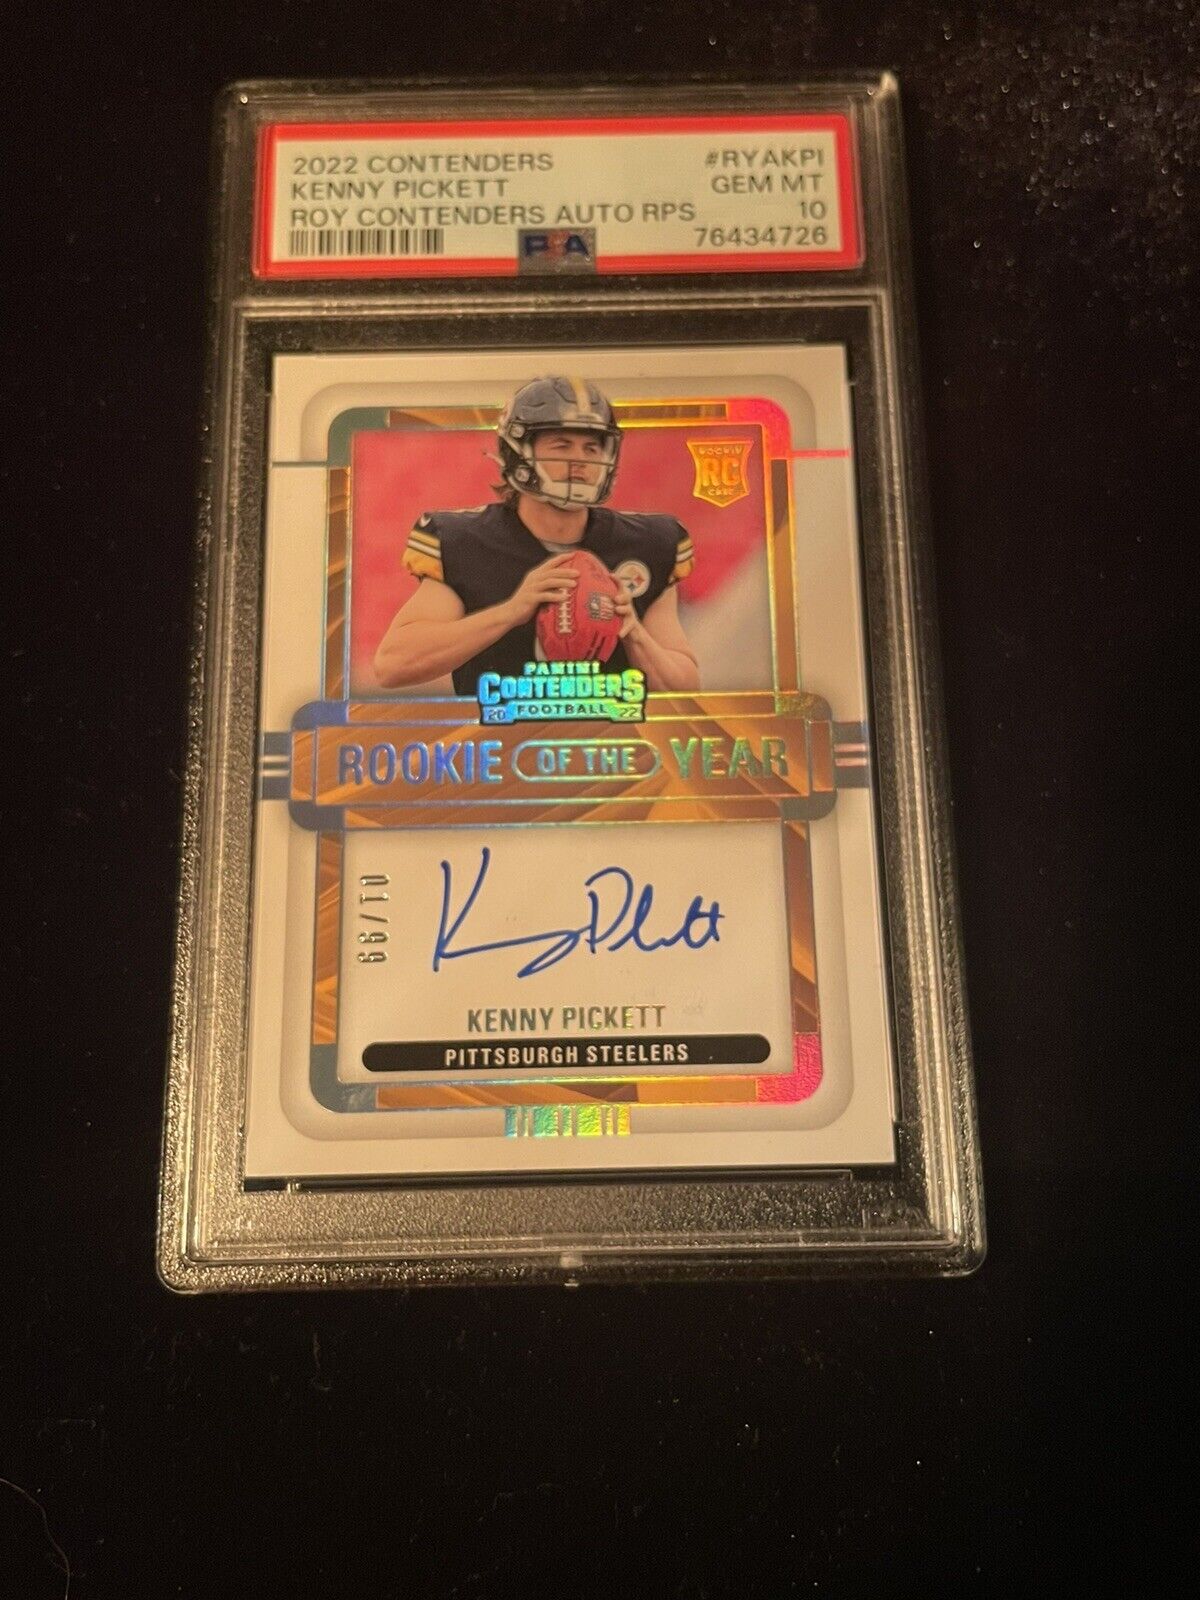 2022 Panini Contenders Kenny Pickett ROY Contenders Auto RPS PSA 10 - 01/99!!